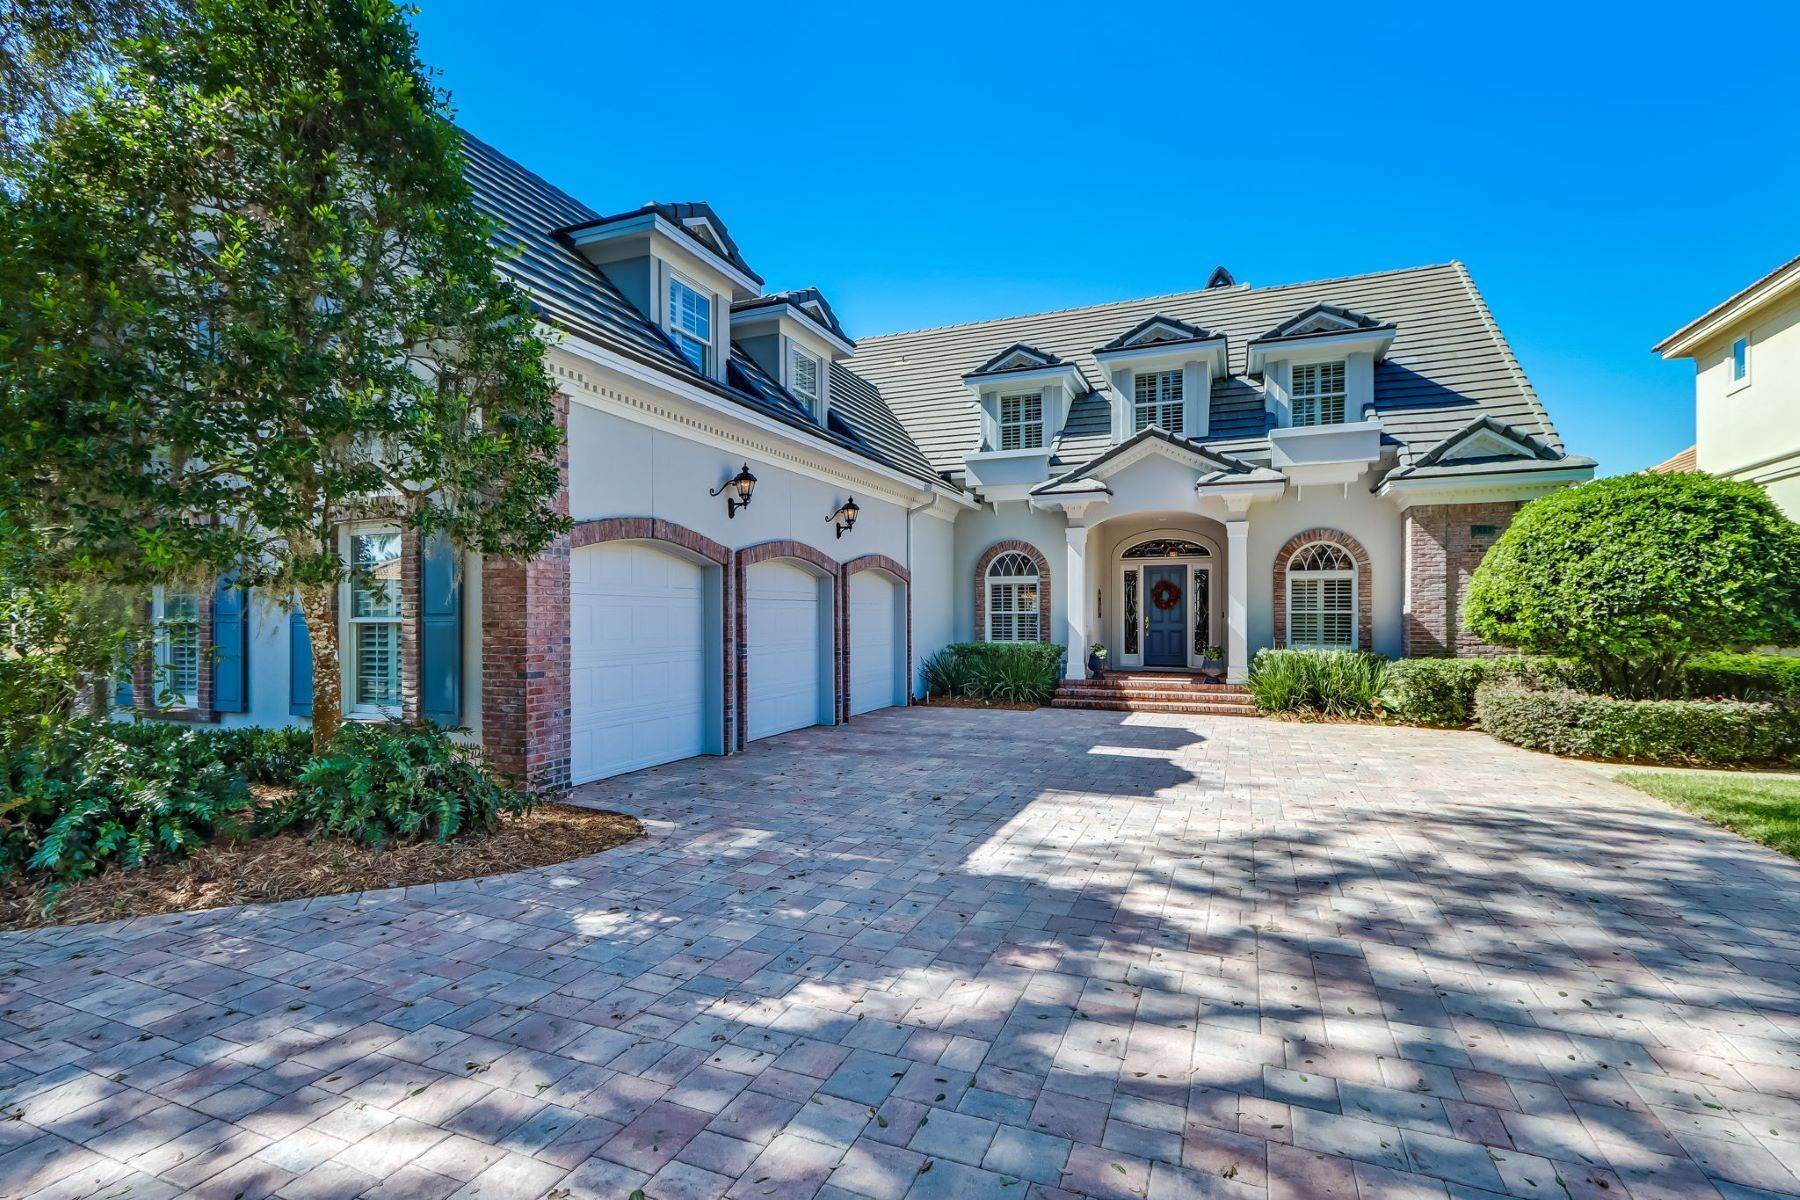 Single Family Homes for Sale at 111 Annapolis Ln, Ponte Vedra Beach, FL 111 Annapolis Ln Ponte Vedra Beach, Florida 32082 United States